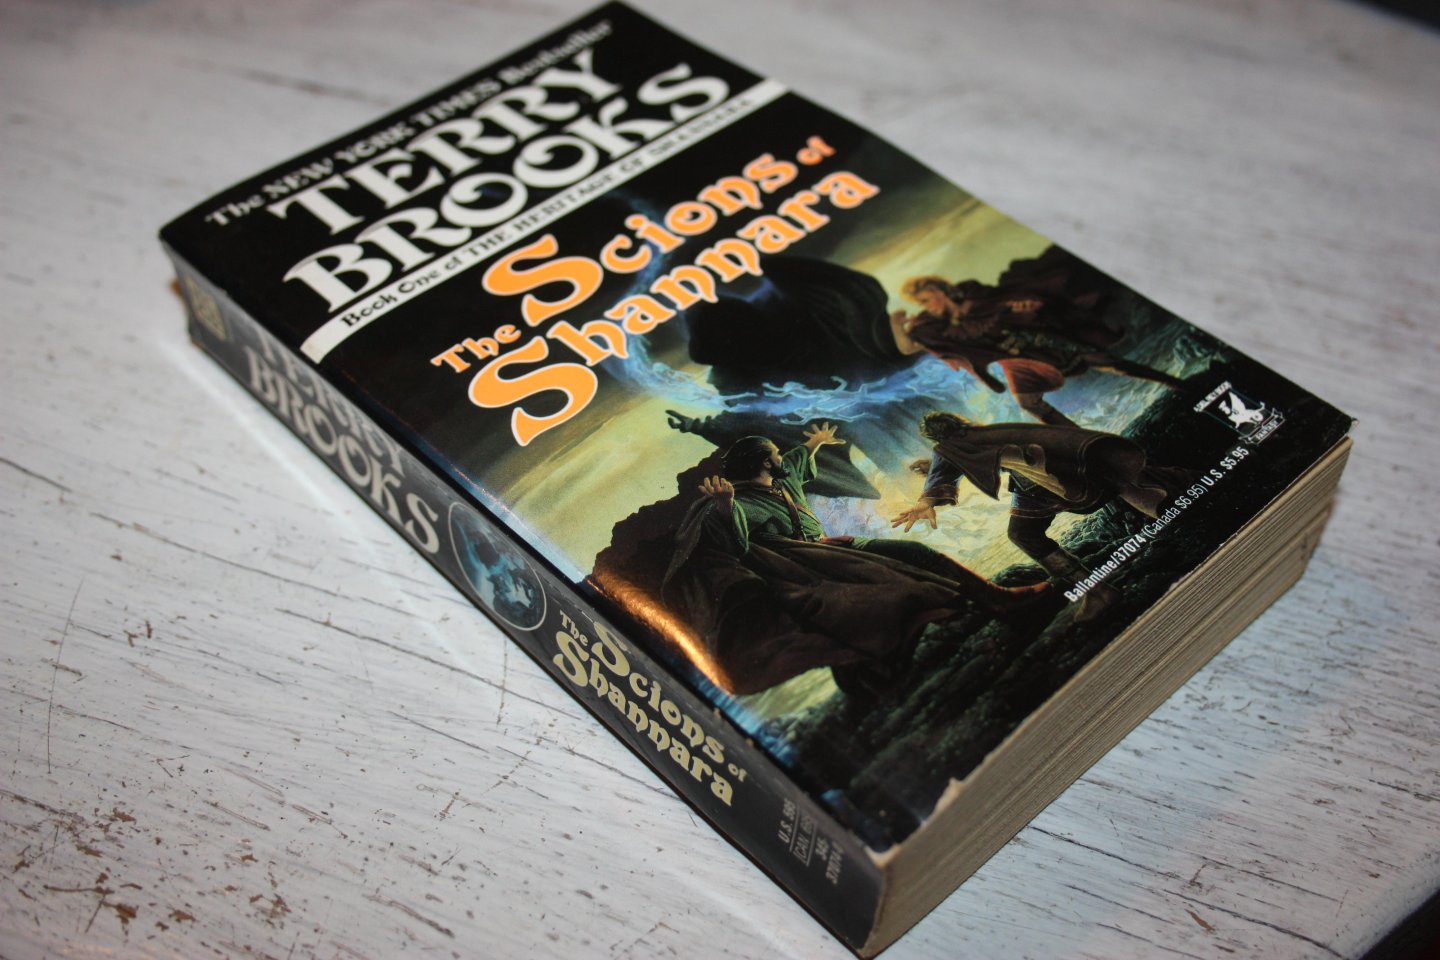 Brooks, Terry - Book One of the Heritage of Shannara / The Scions of Shannara